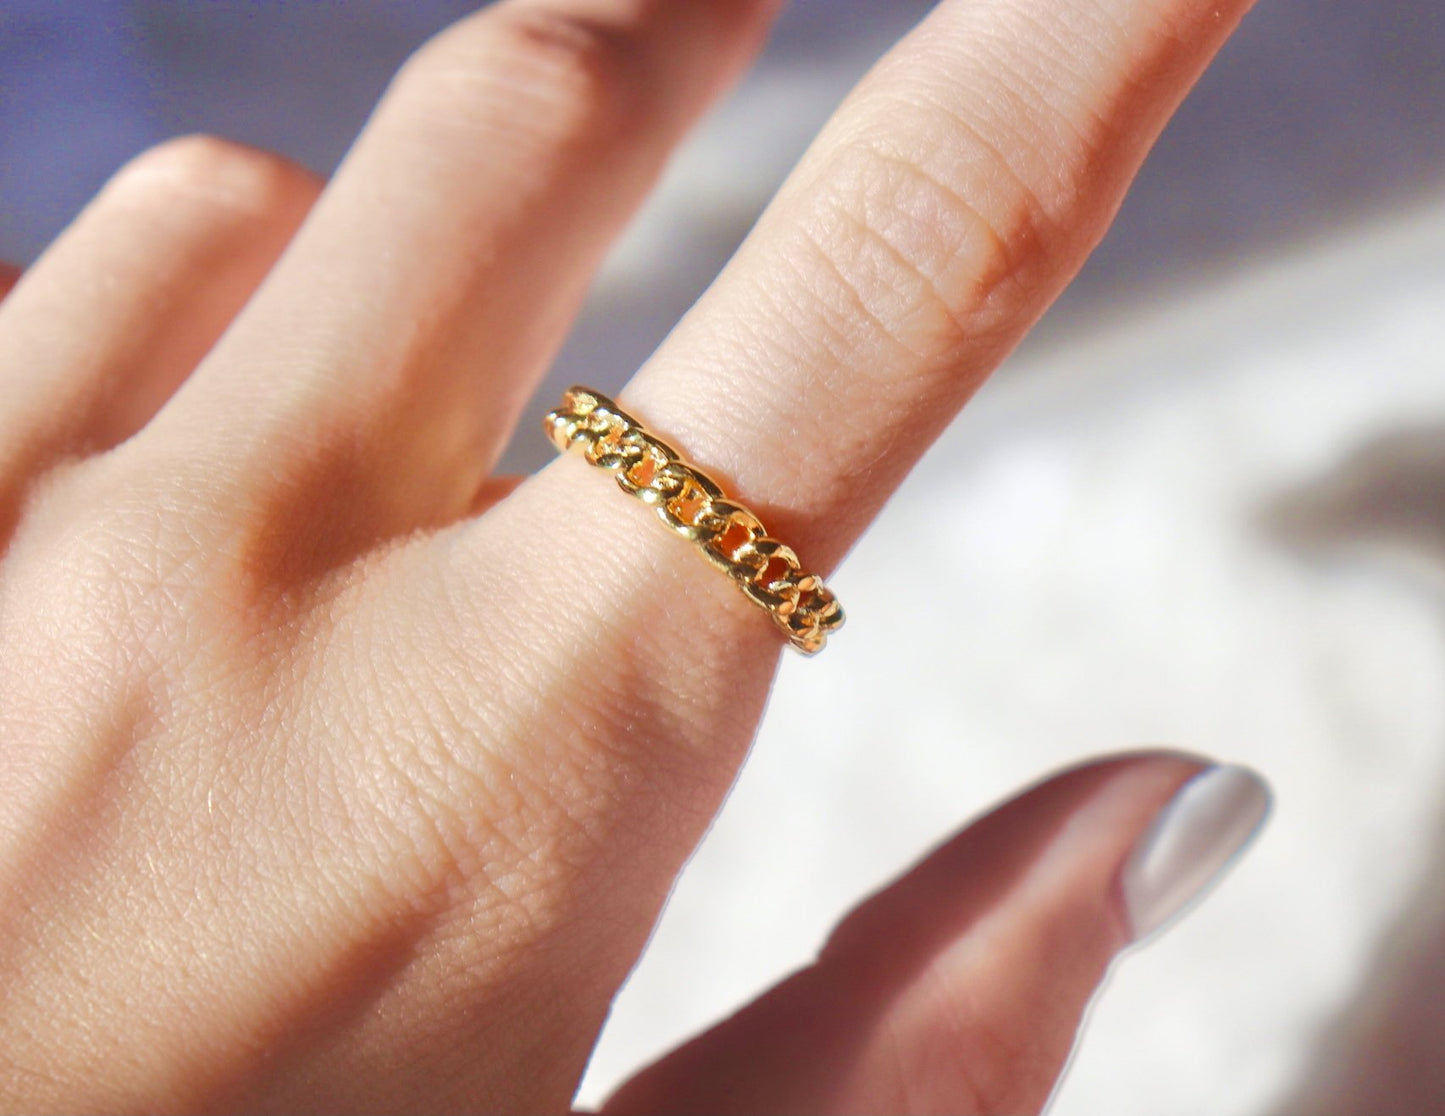 Santee 24k Gold Plated Ring